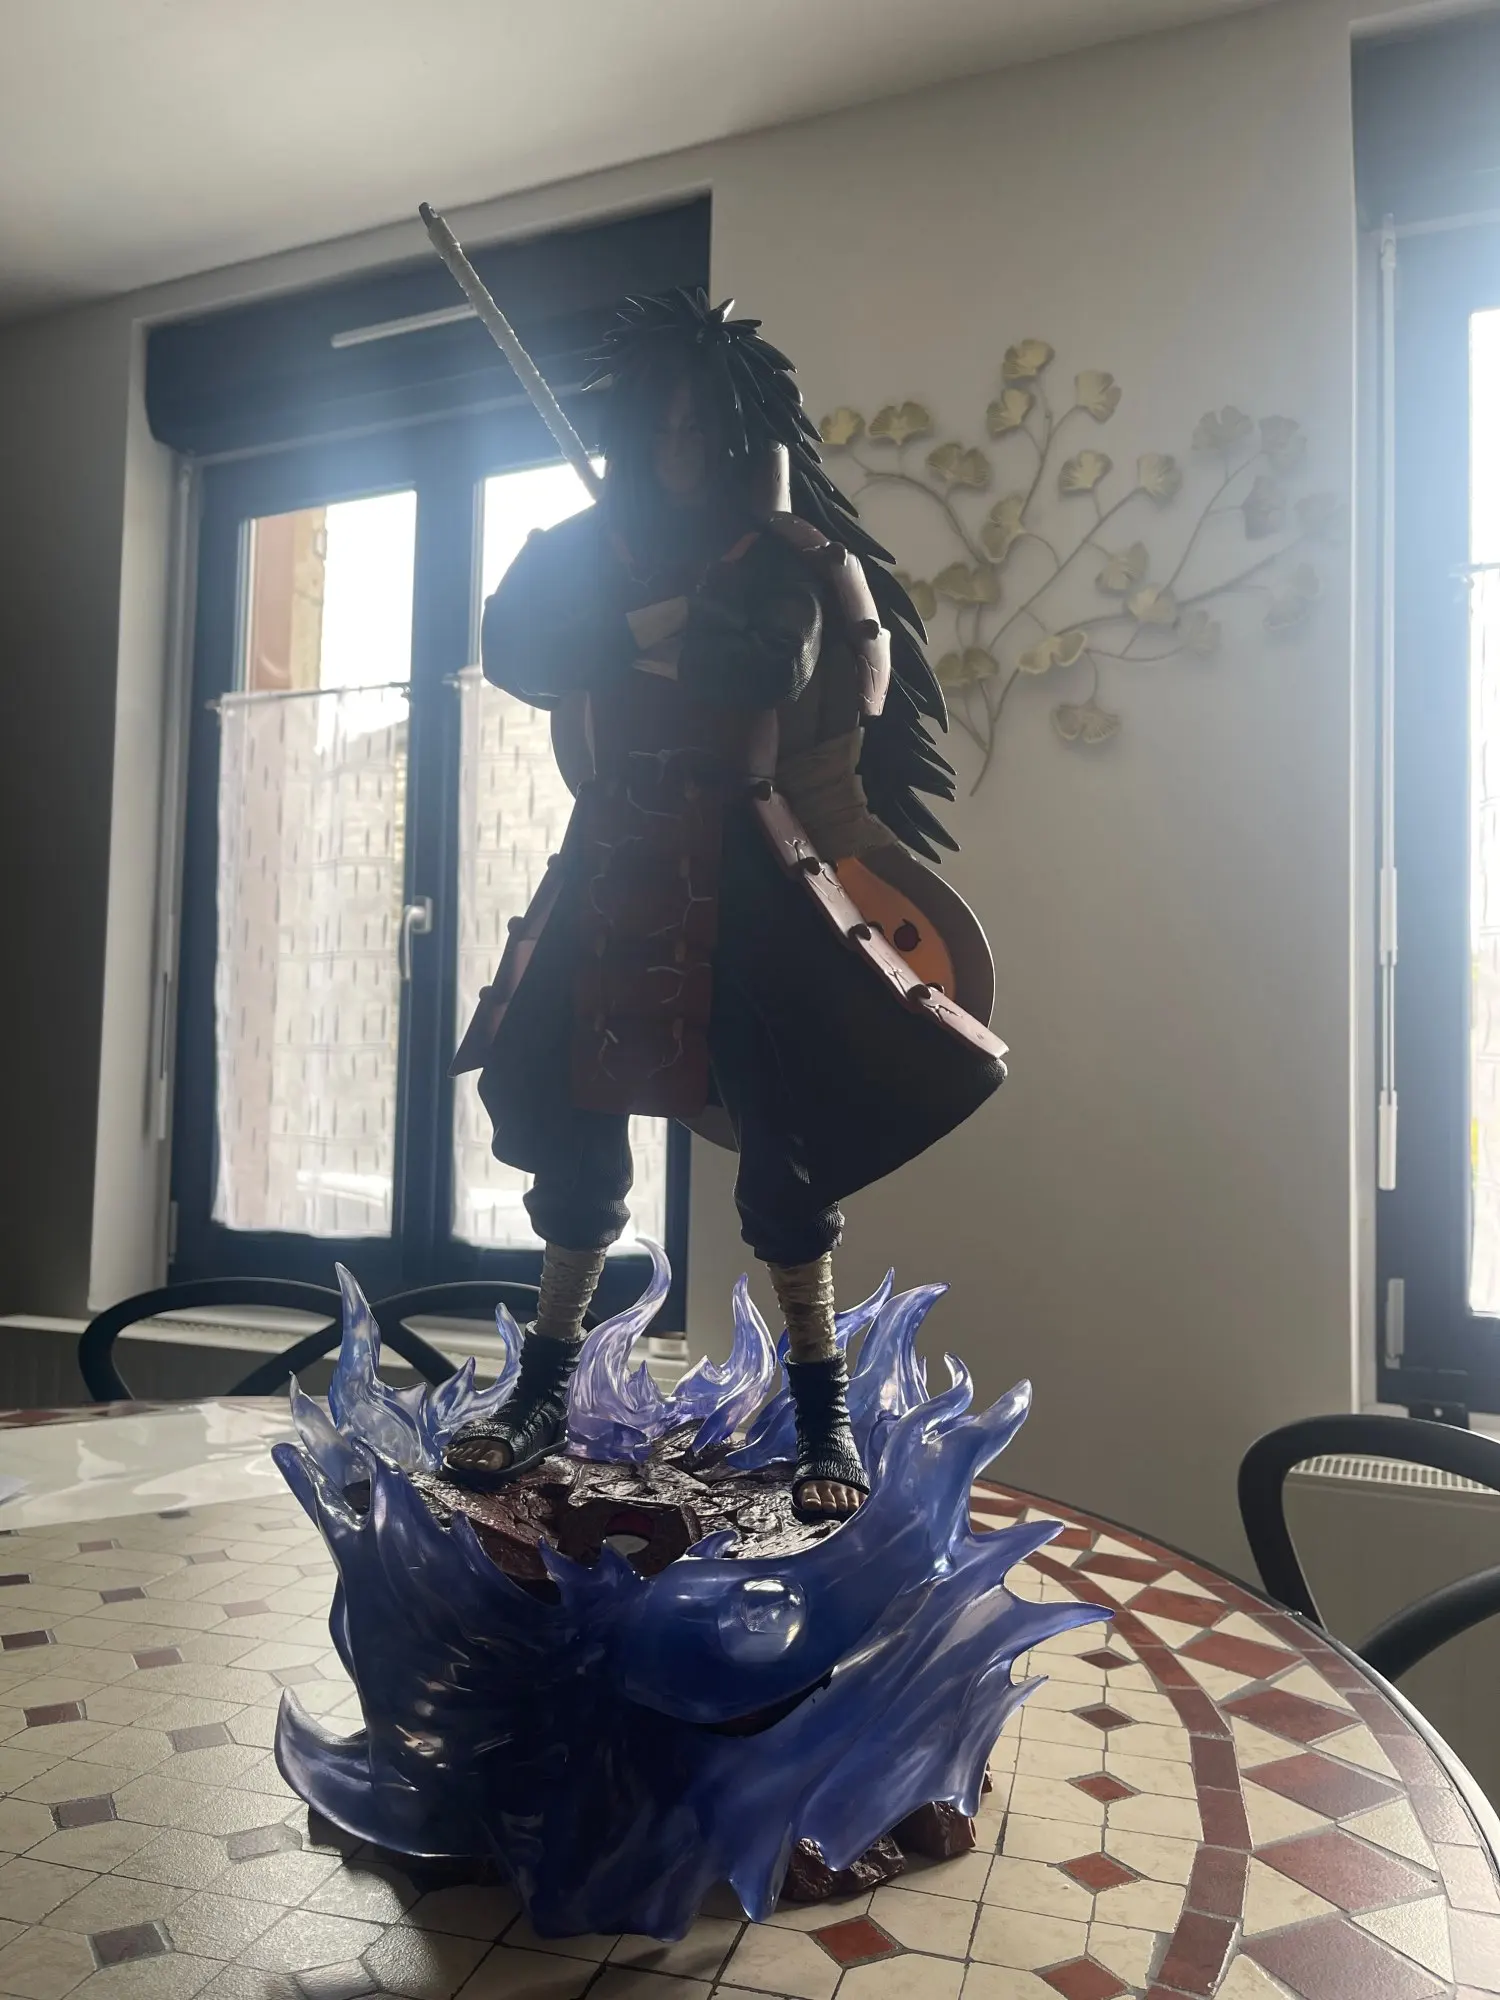 Naruto Figure Uchiha Madara 62cm Statue Susanoo Action Figurine PVC Anime Figures Collectible Model Decoration Ornament Toy Gift photo review